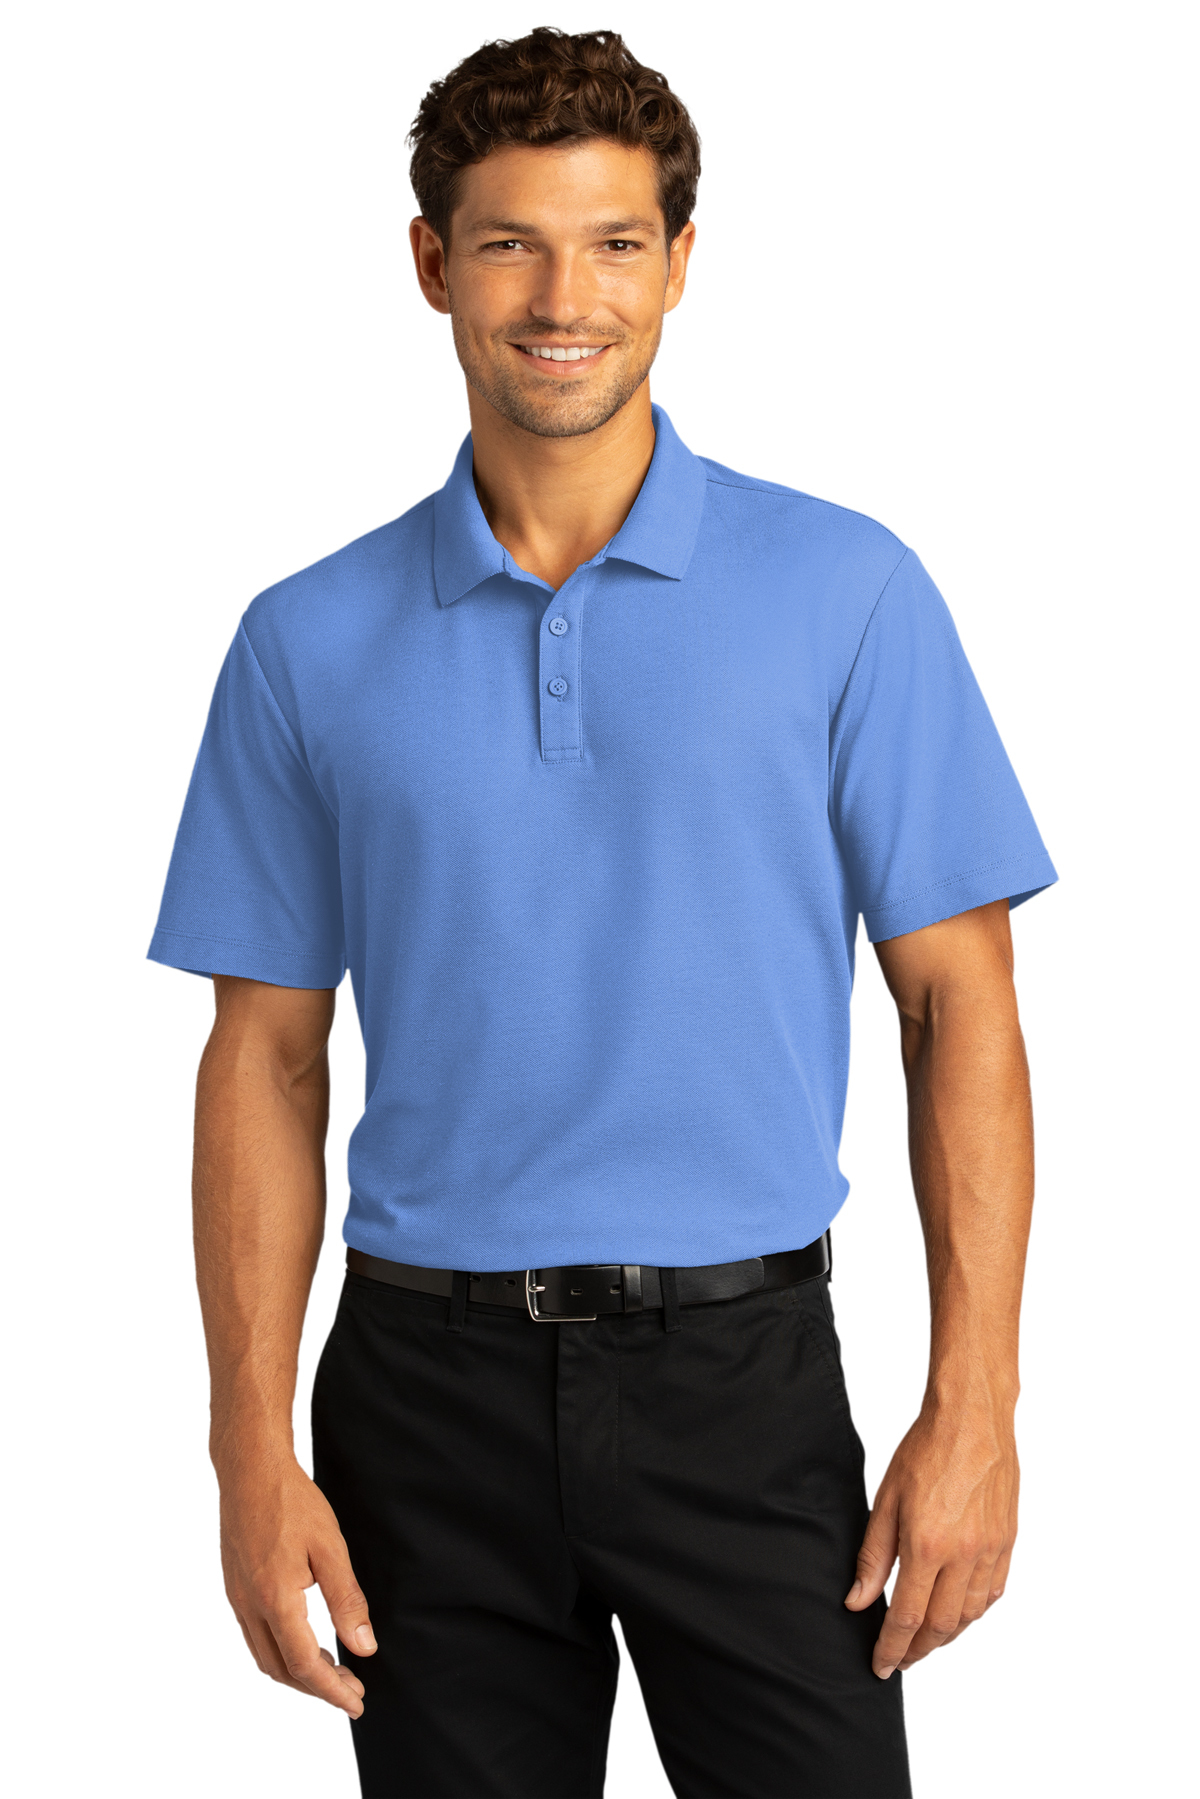 Port Authority SuperPro React Polo | Product | Company Casuals